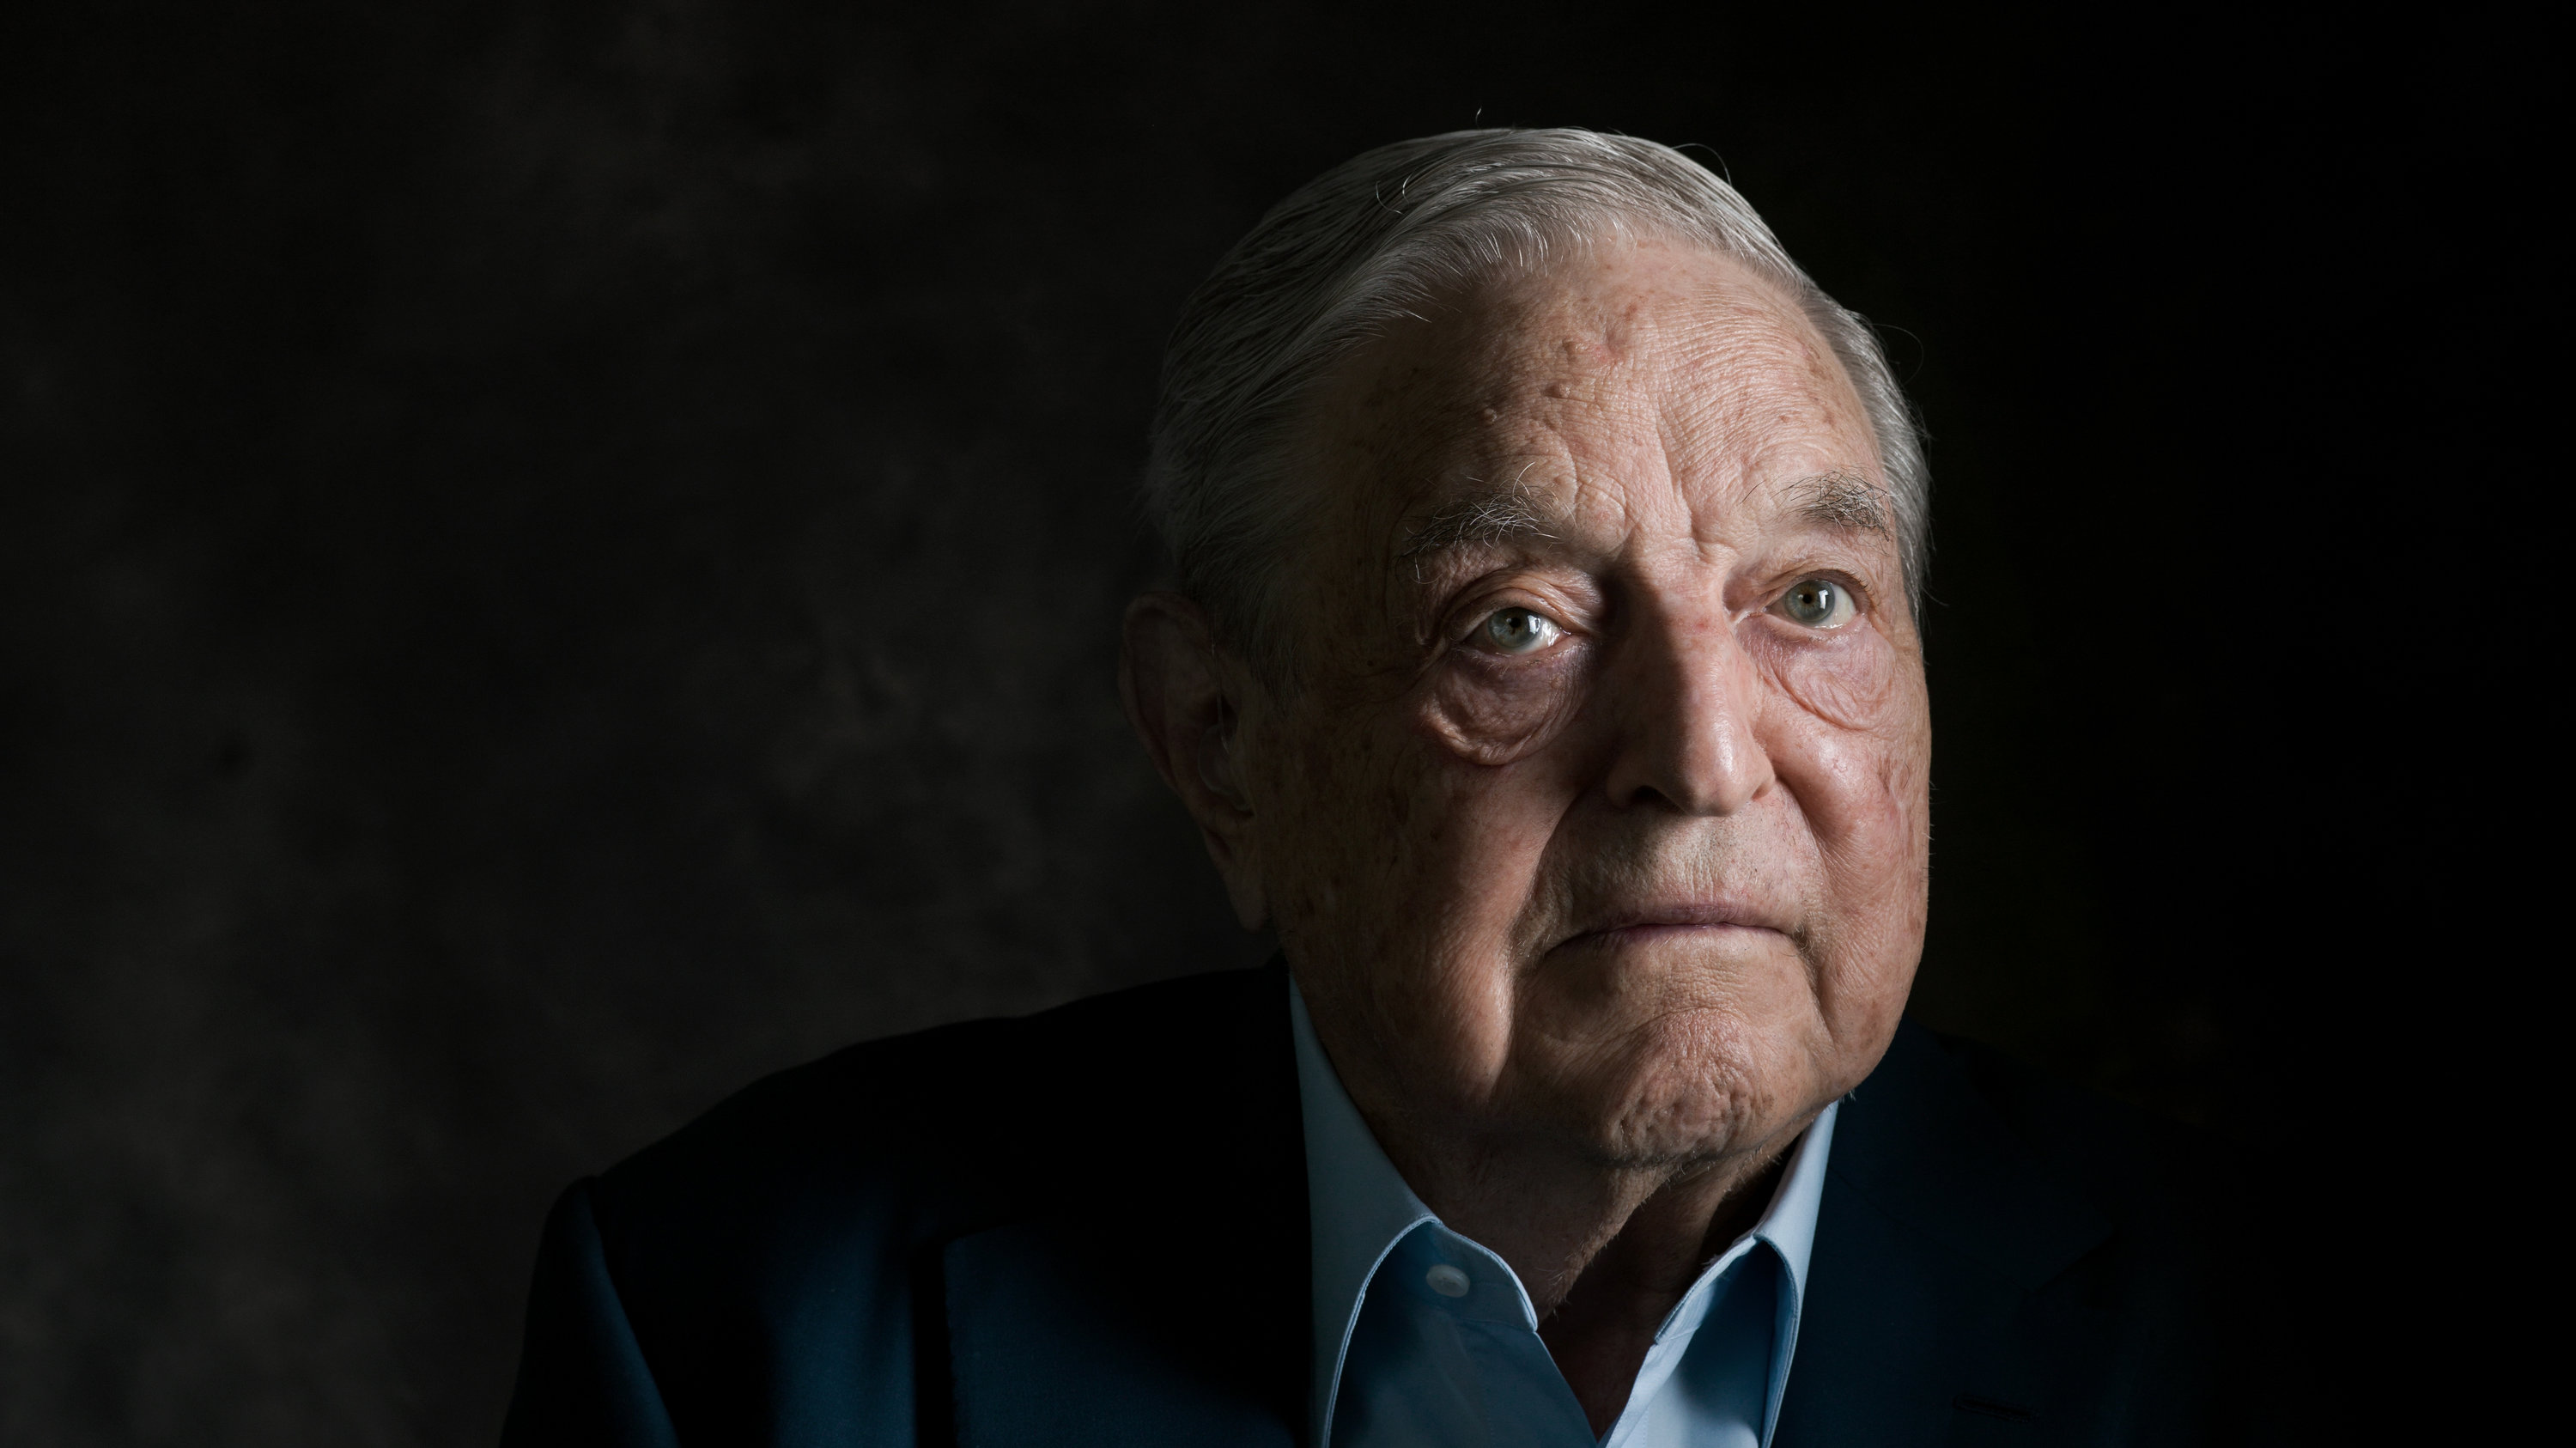 How Vilification of George Soros Moved From the Fringes to the Mainstream